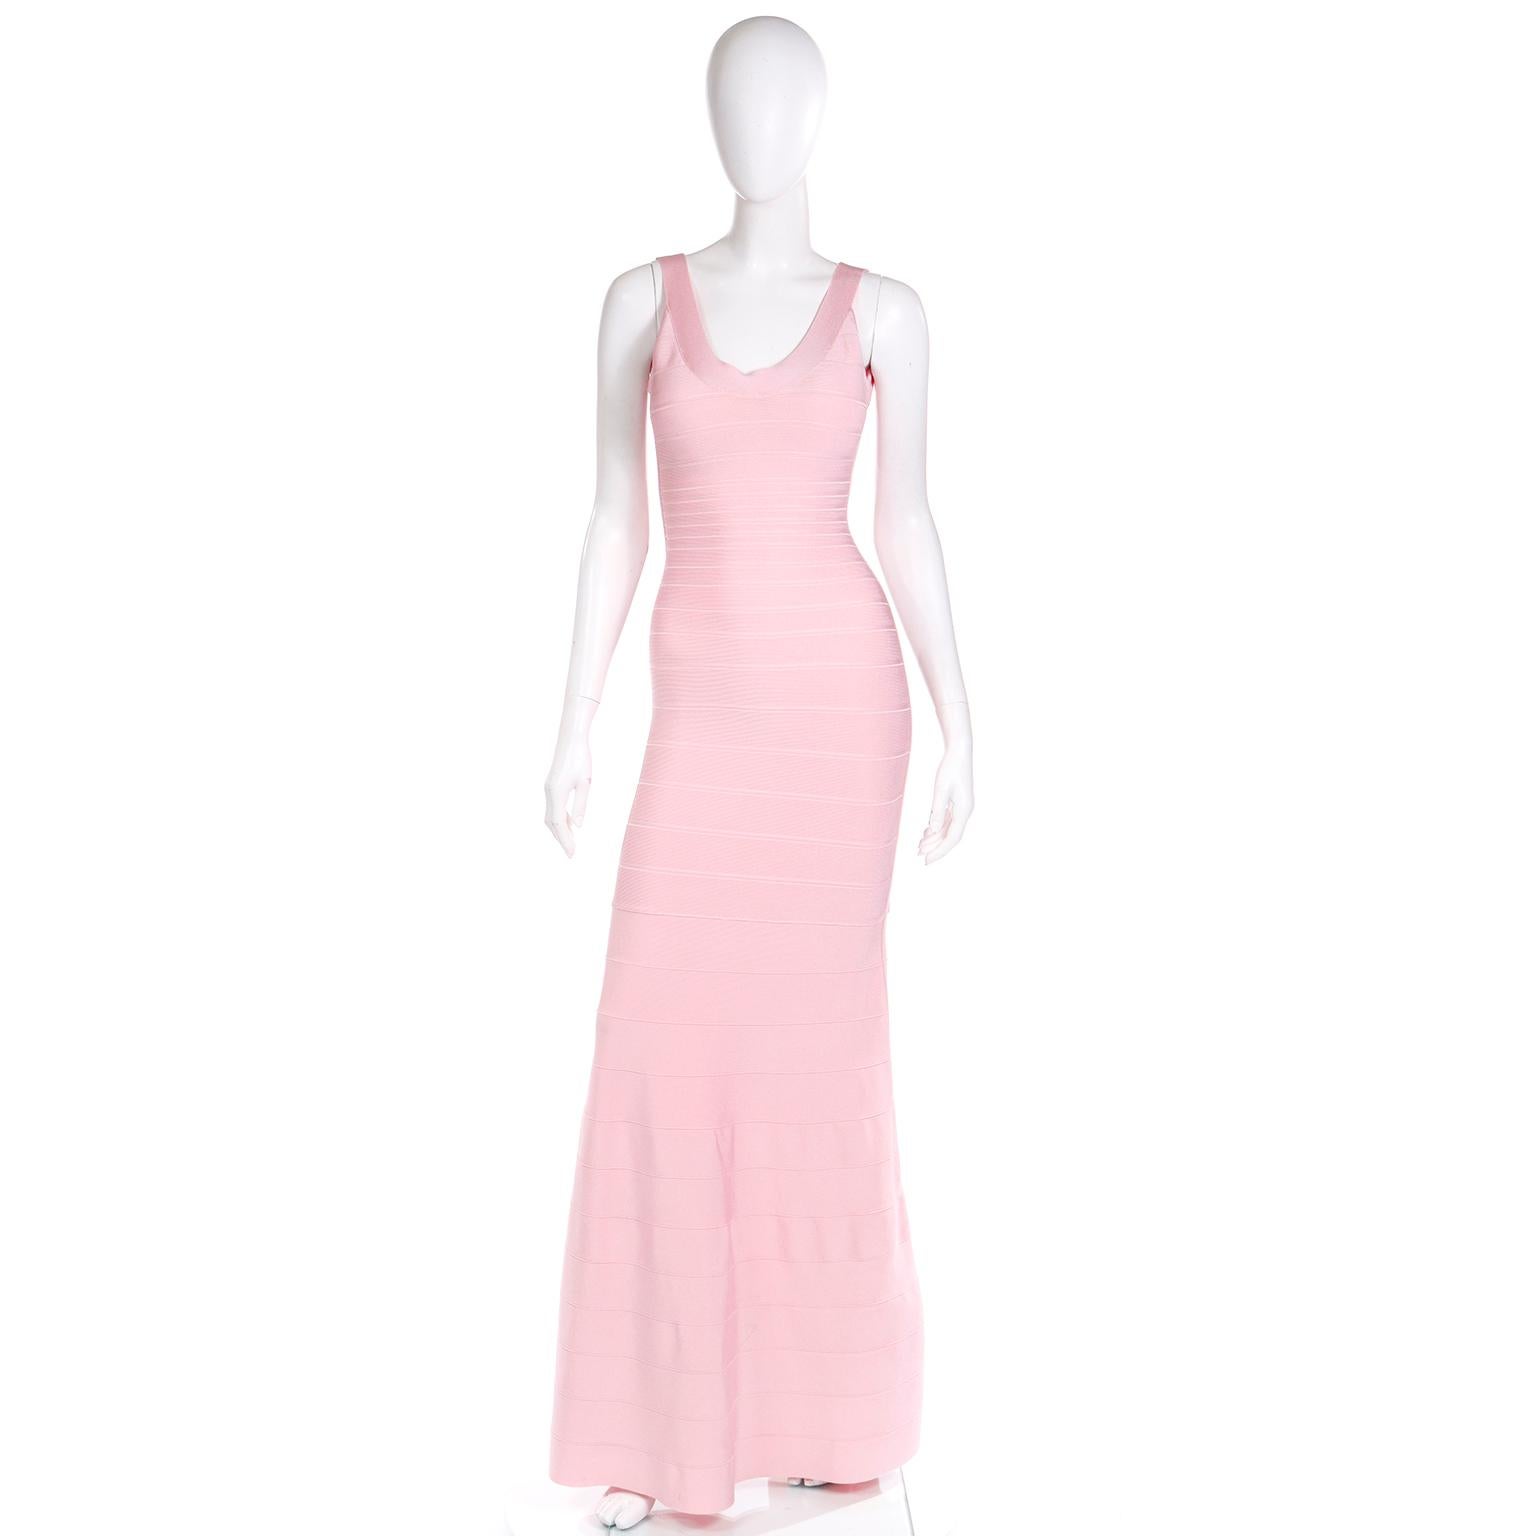 This pretty Herve Leger full length bandage dress is in a pretty pale cotton candy pink.  The dress has sewn in bra cups and a concealed 13